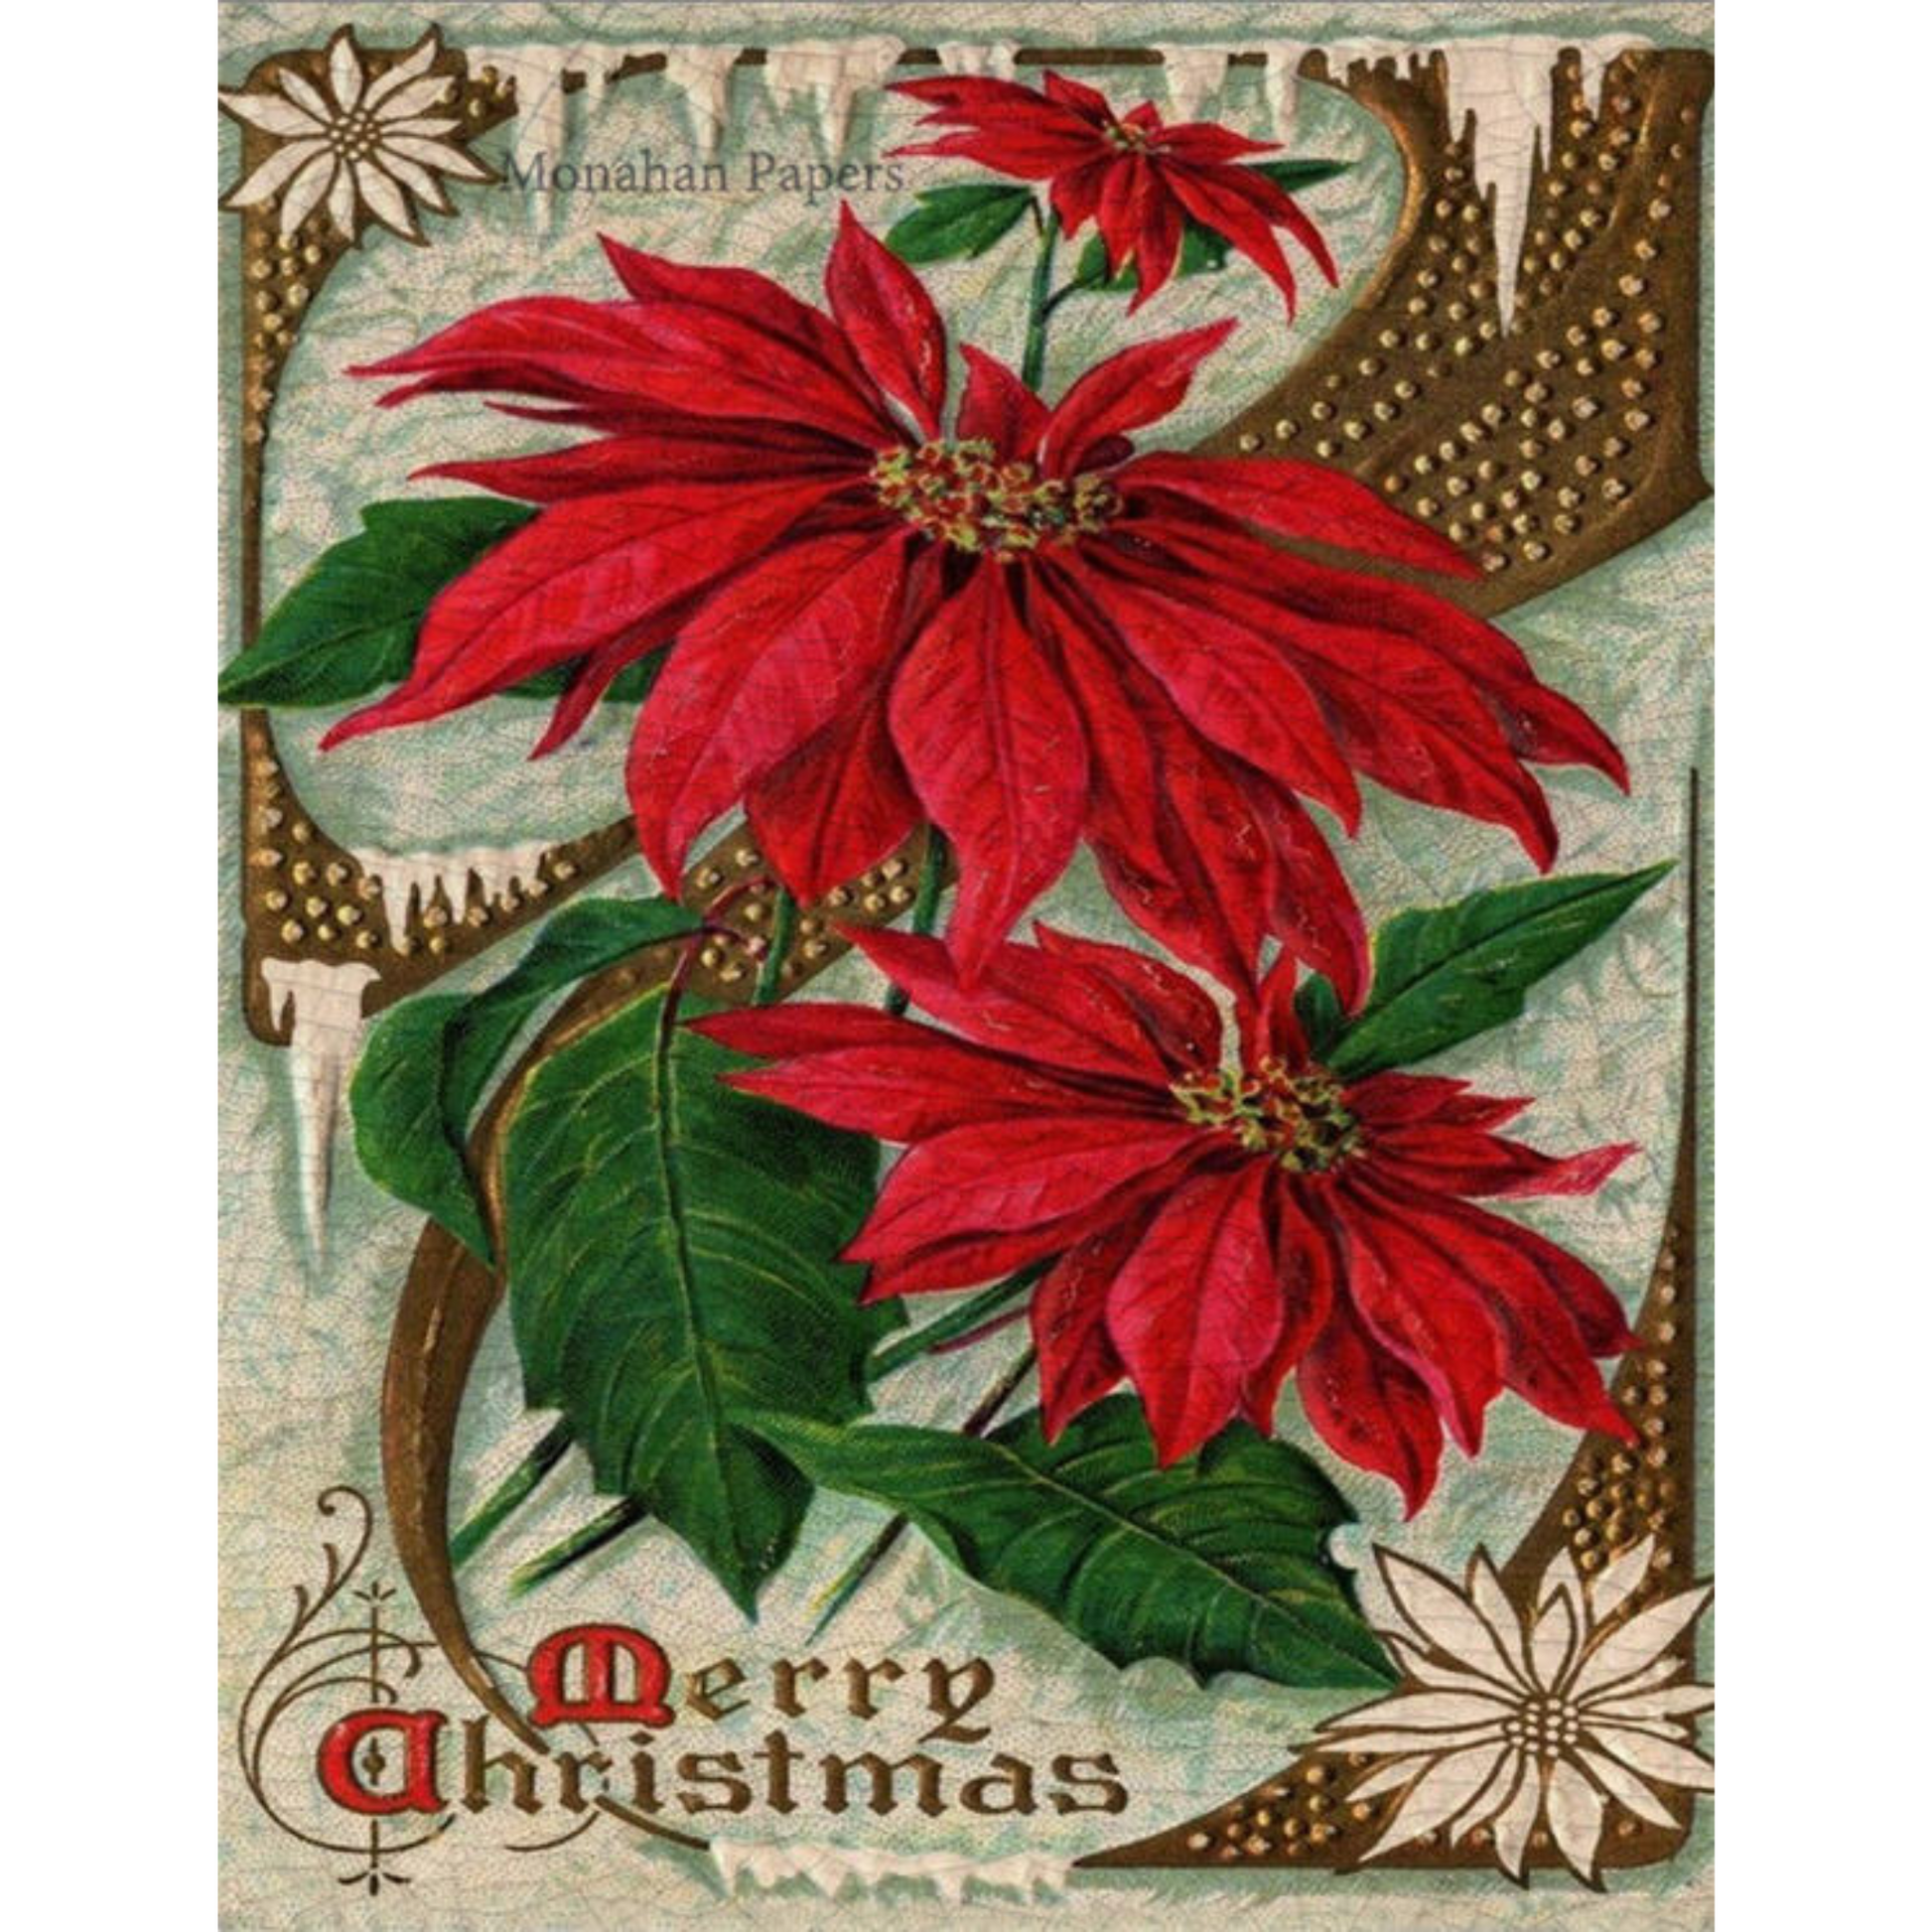 "Merry Christmas Poinsetta Bundle" Decoupage Paper by Monahan Papers available at Milton's Daughter